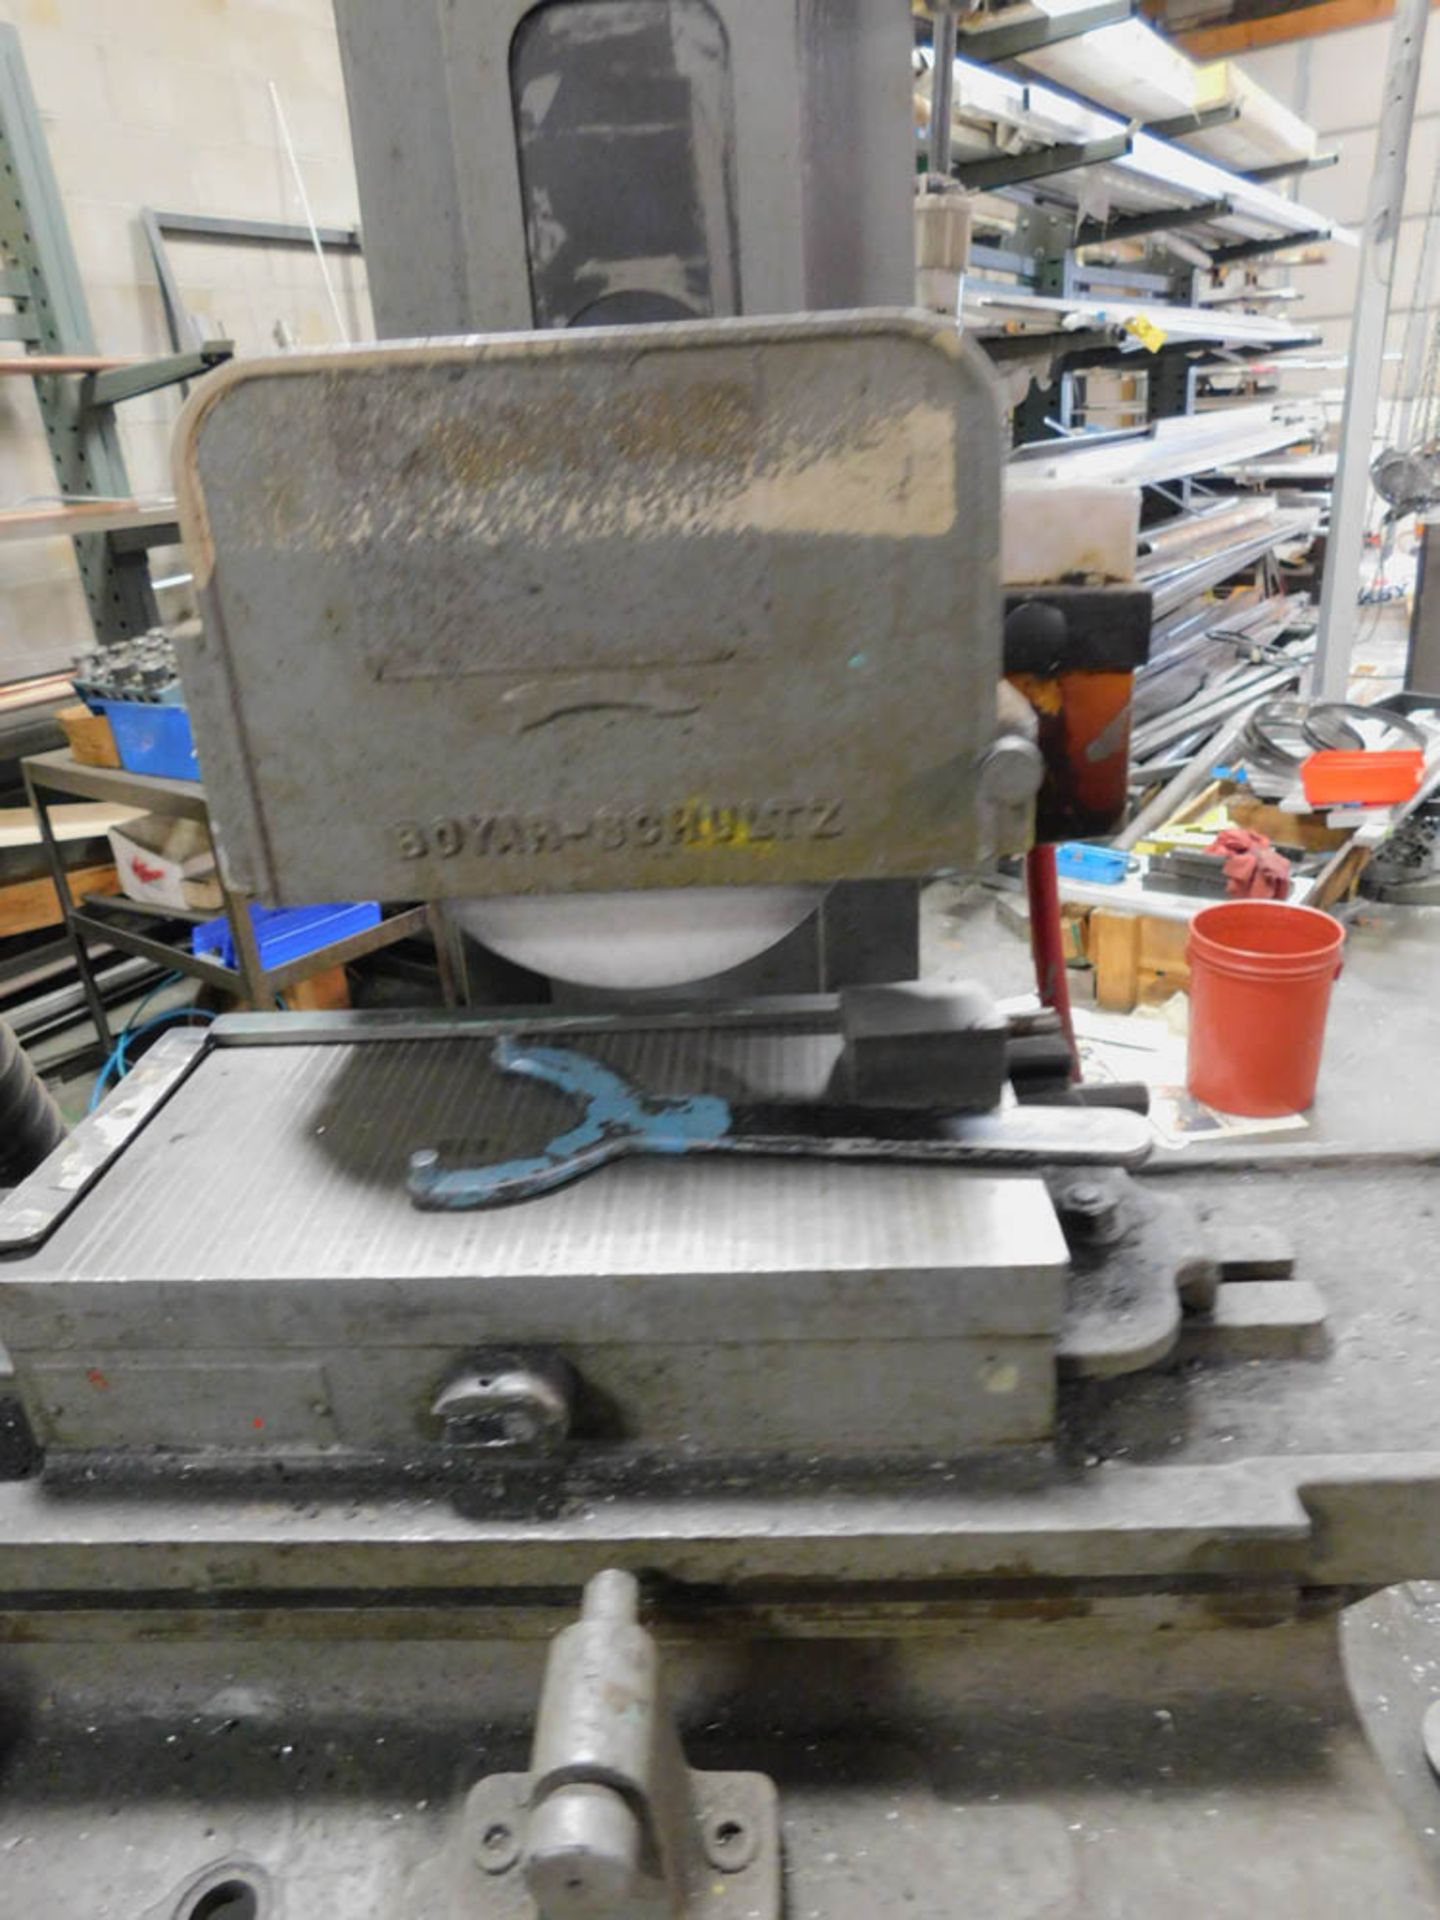 BOYAR SCHULTZ H612 HAND FEED SURFACE GRINDER WITH 6" X 12" MAGNETIC CHUCK, 1HP DIRECT SPINDLE DRIVE, - Image 2 of 4